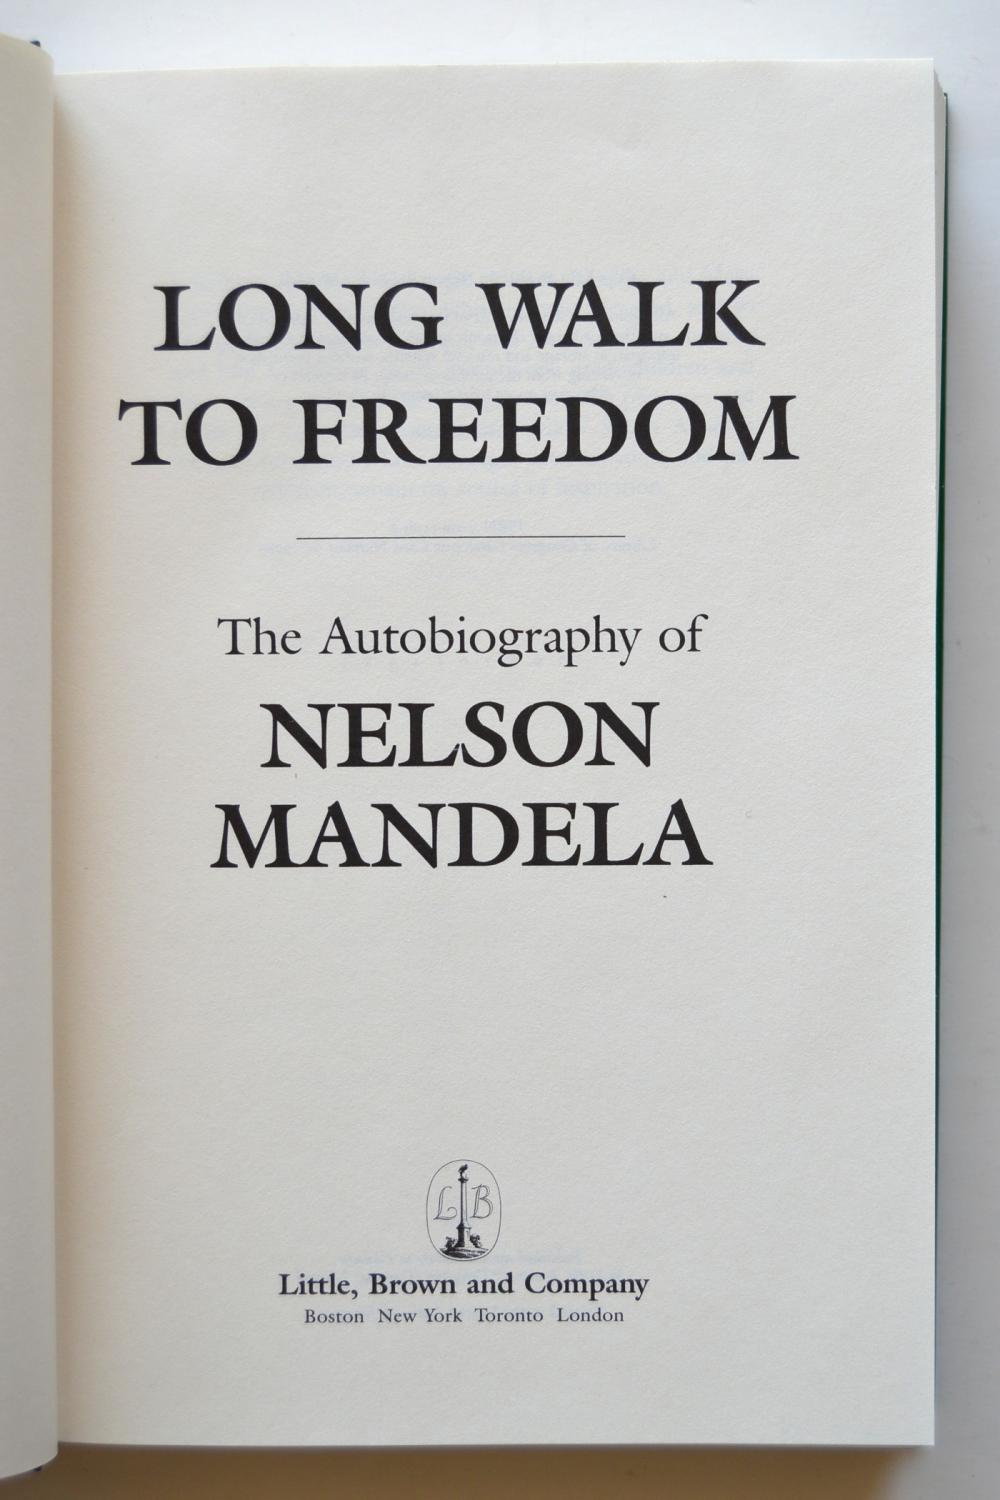 book review on long walk to freedom